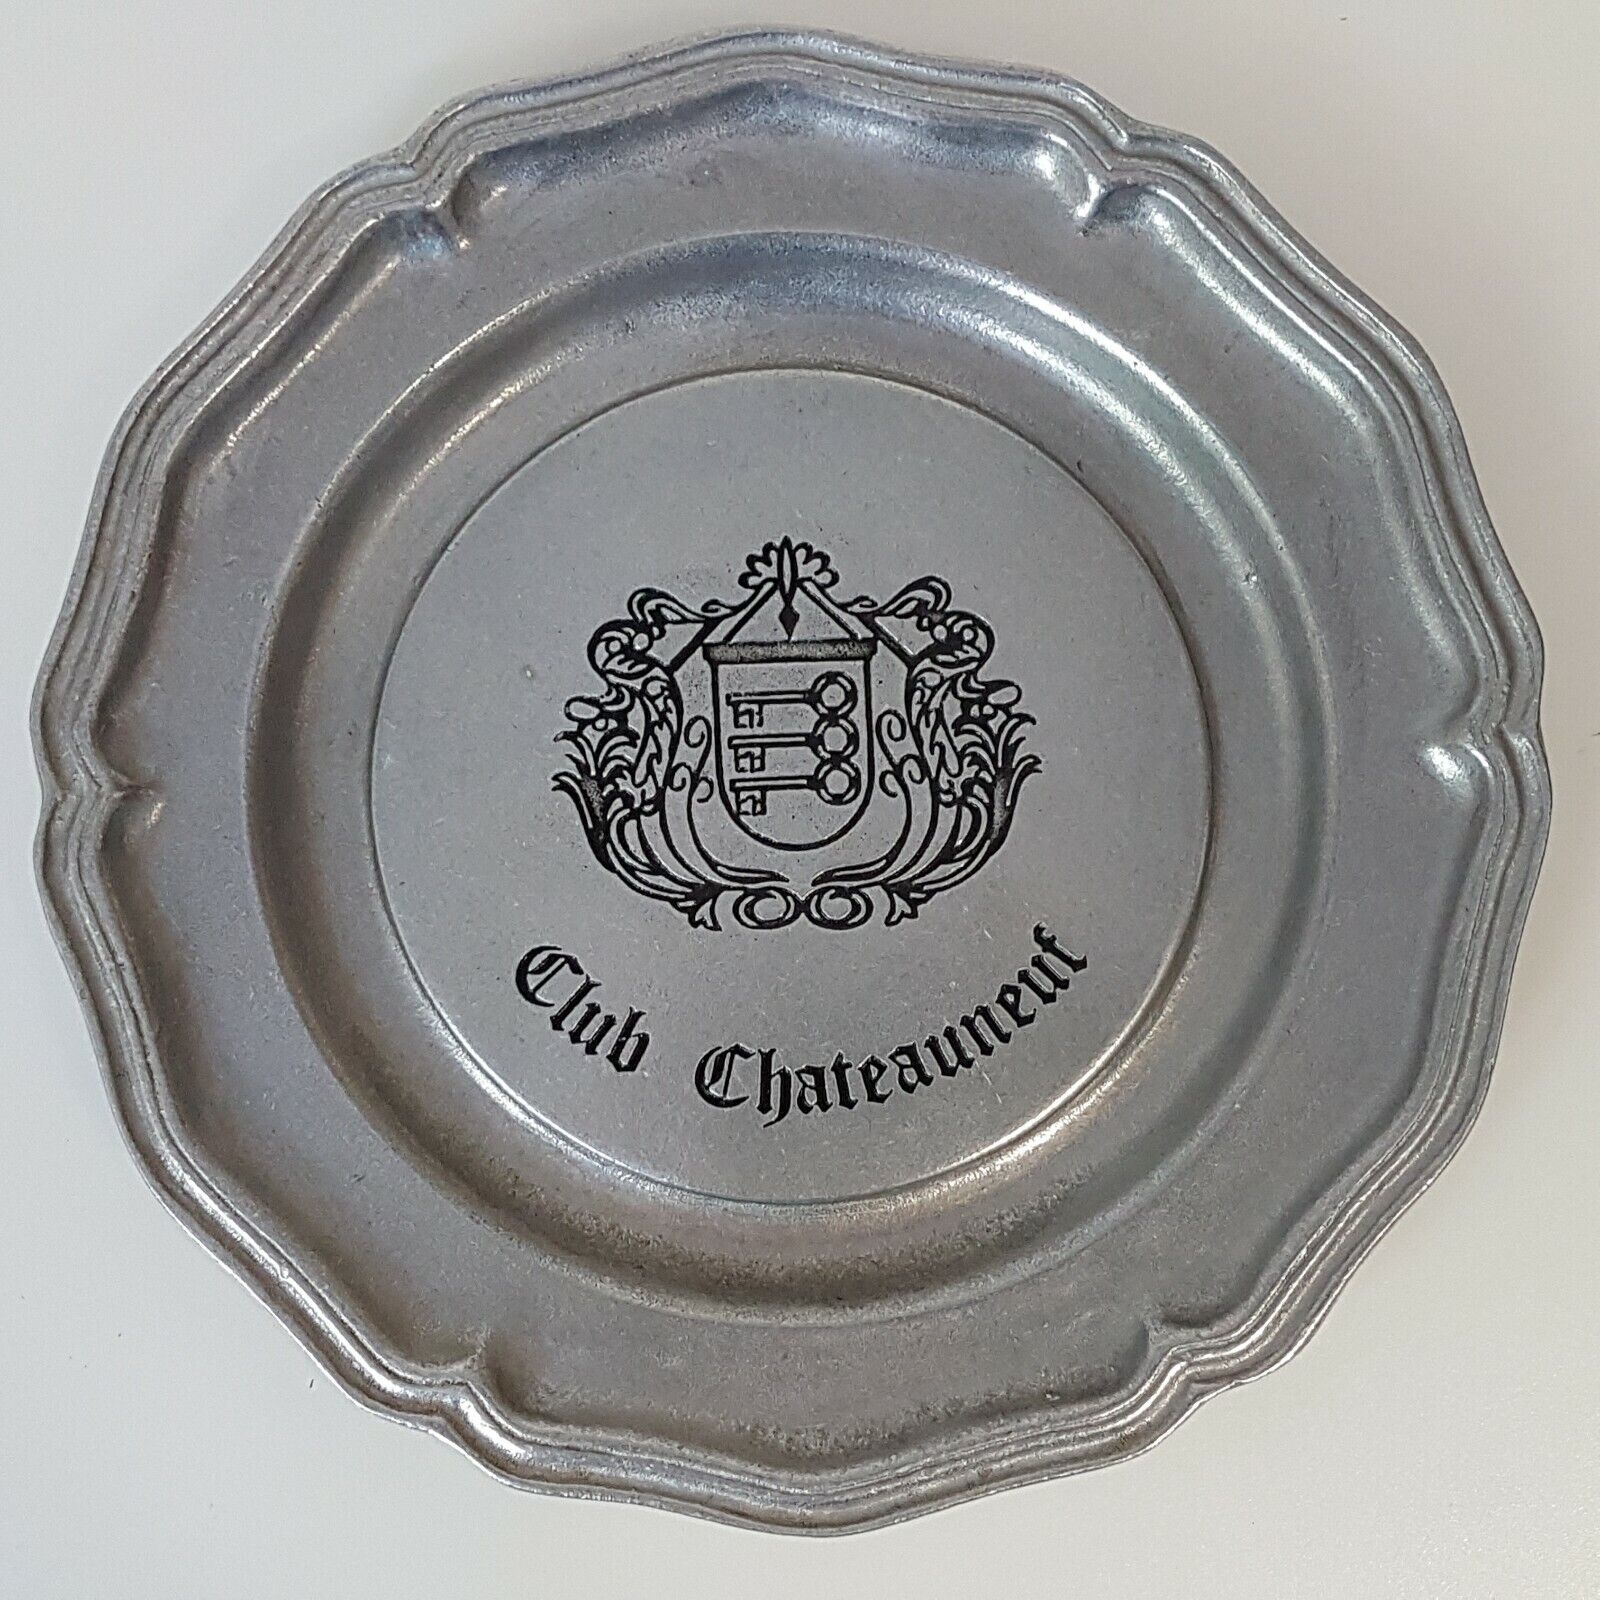 Club Chateauneuf Metal Plate by Bon Chef Augusta New Jersey